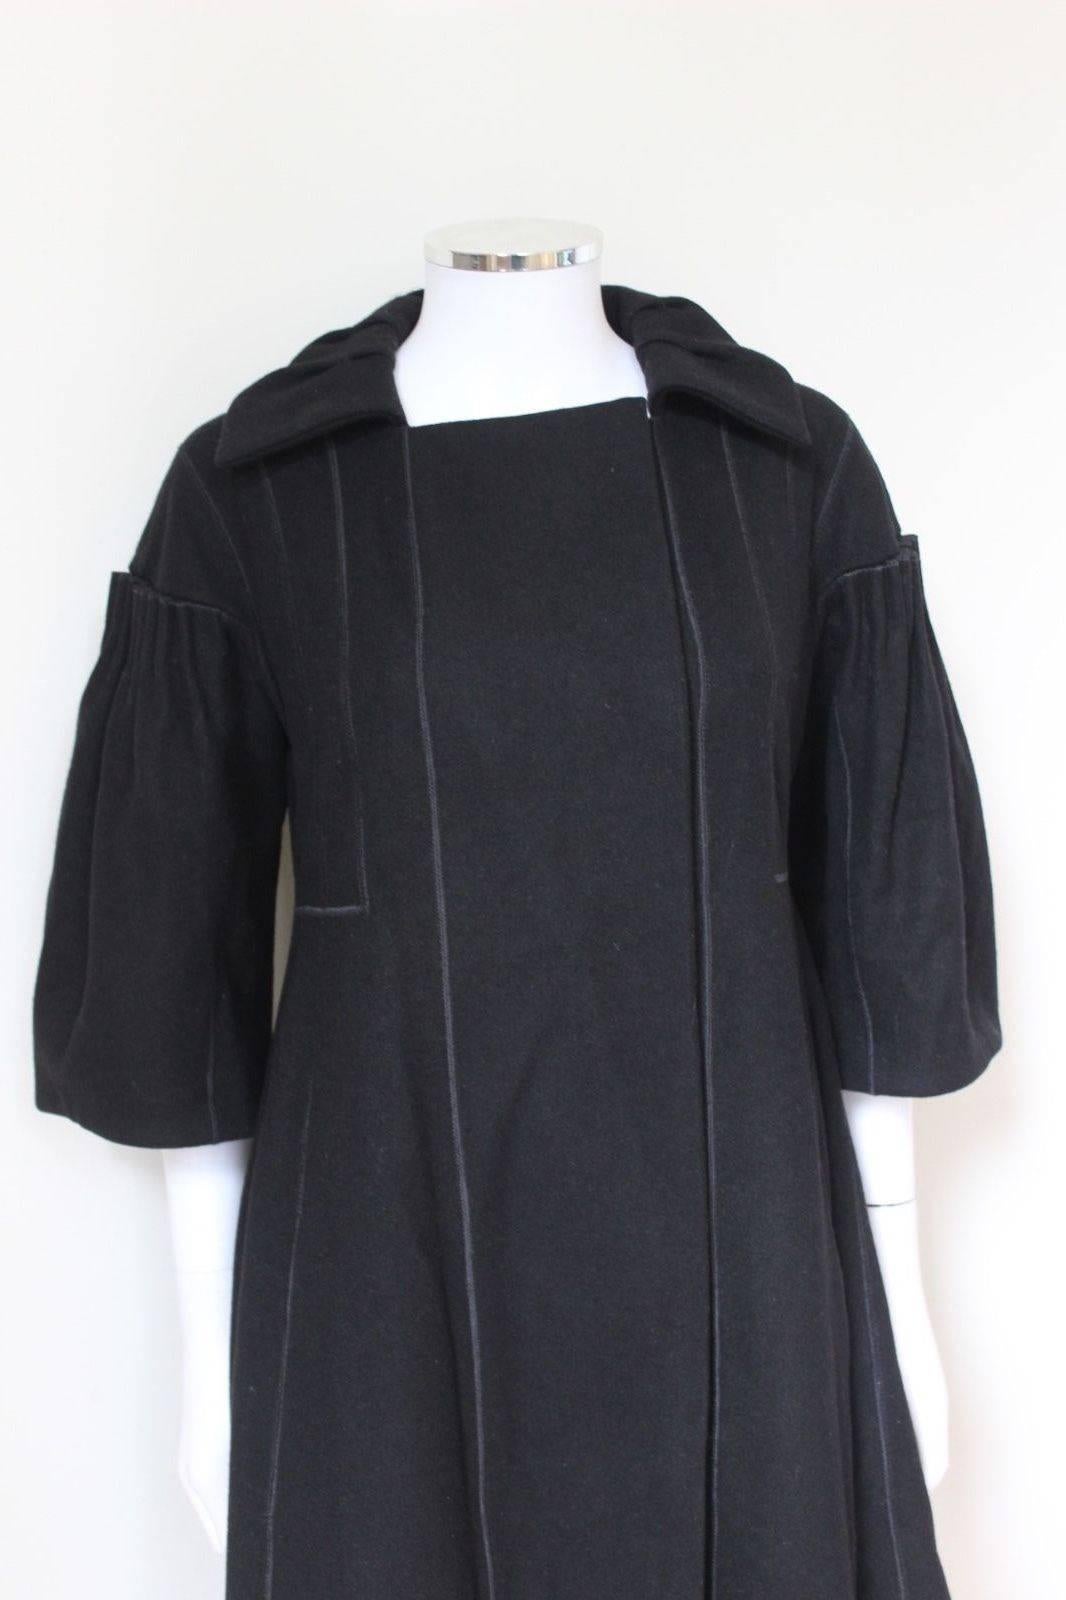 Louis Vuitton Black Pleated Trim Swing Coat F38 Uk 10   In Excellent Condition For Sale In London, GB